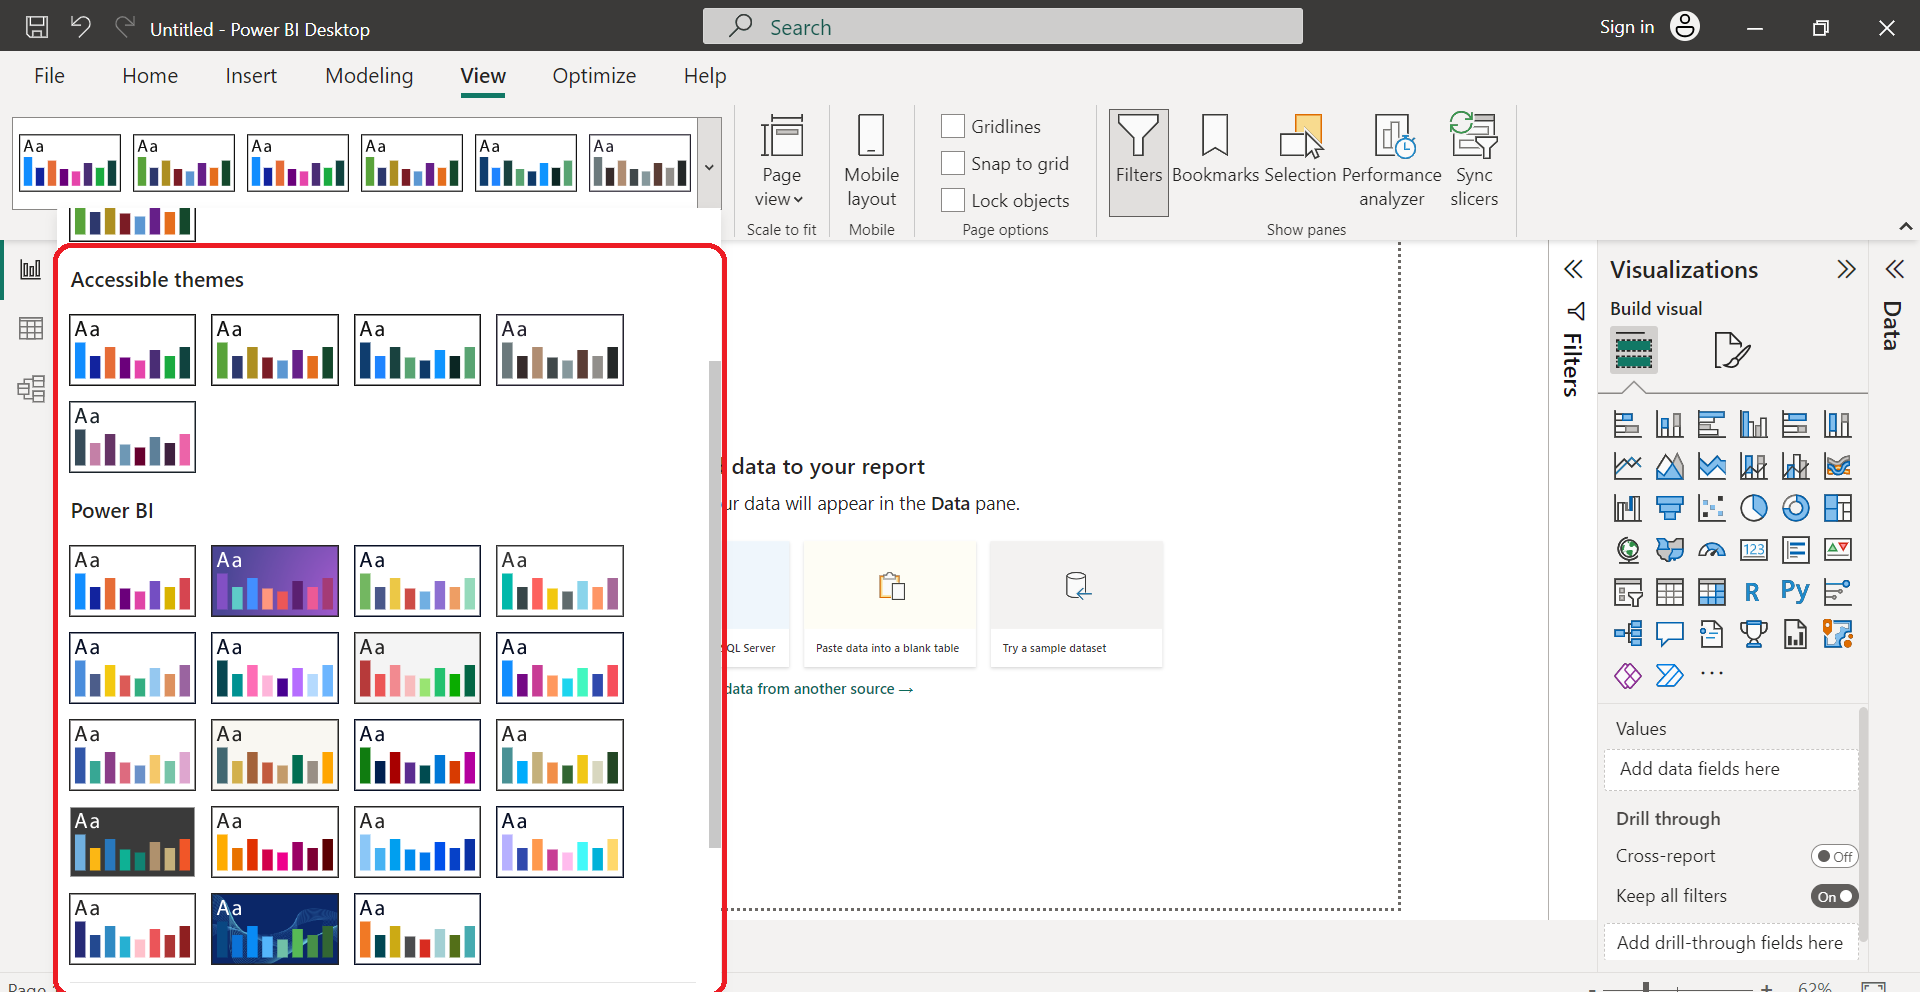 Accessible themes in Power BI